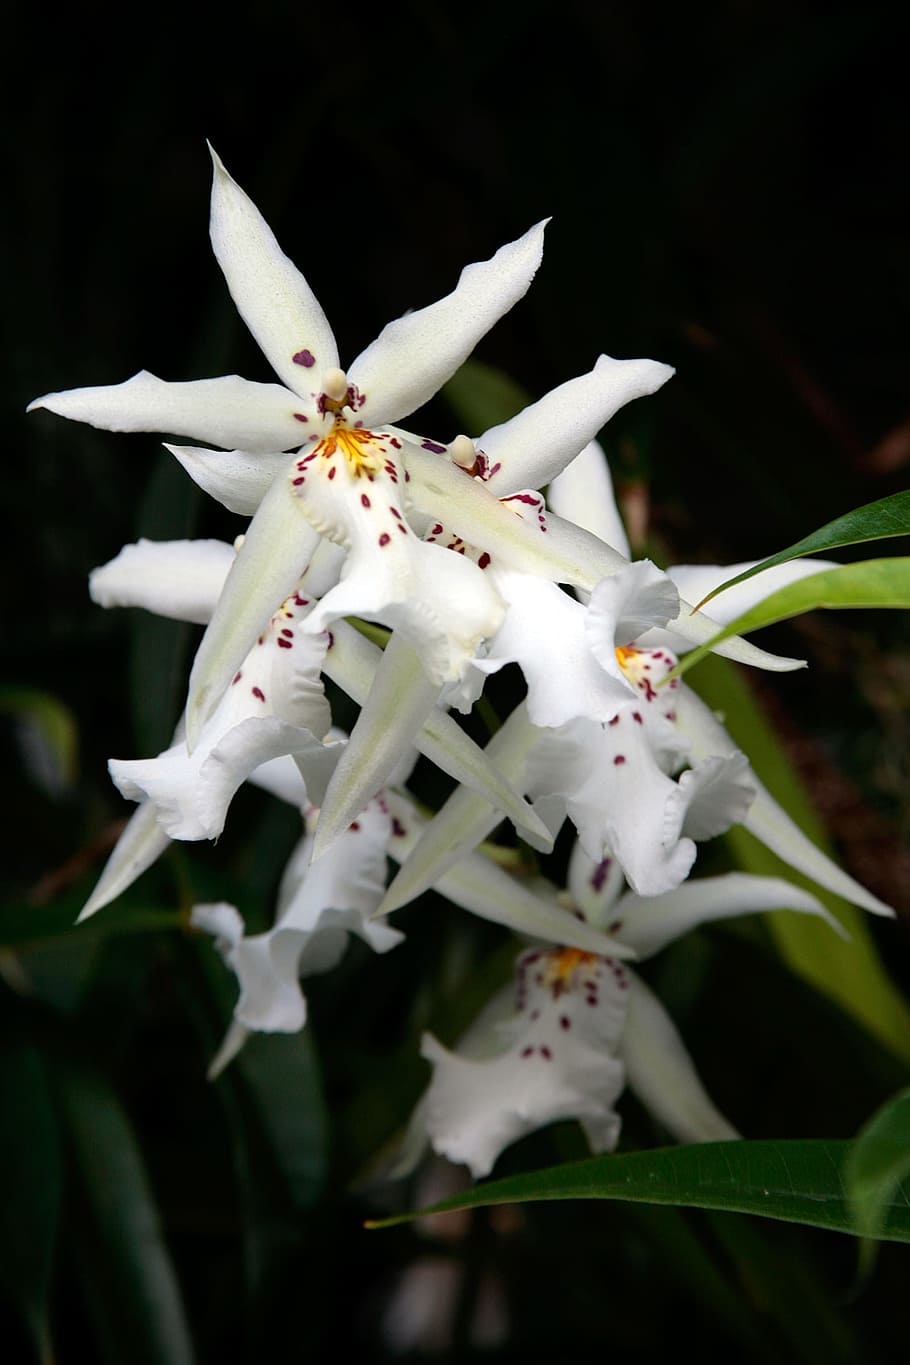 white, spider orchid flowers, variety, brassia orchids, orchids., spider orchid flower mimics, attract, parasitic, female, spider wasps